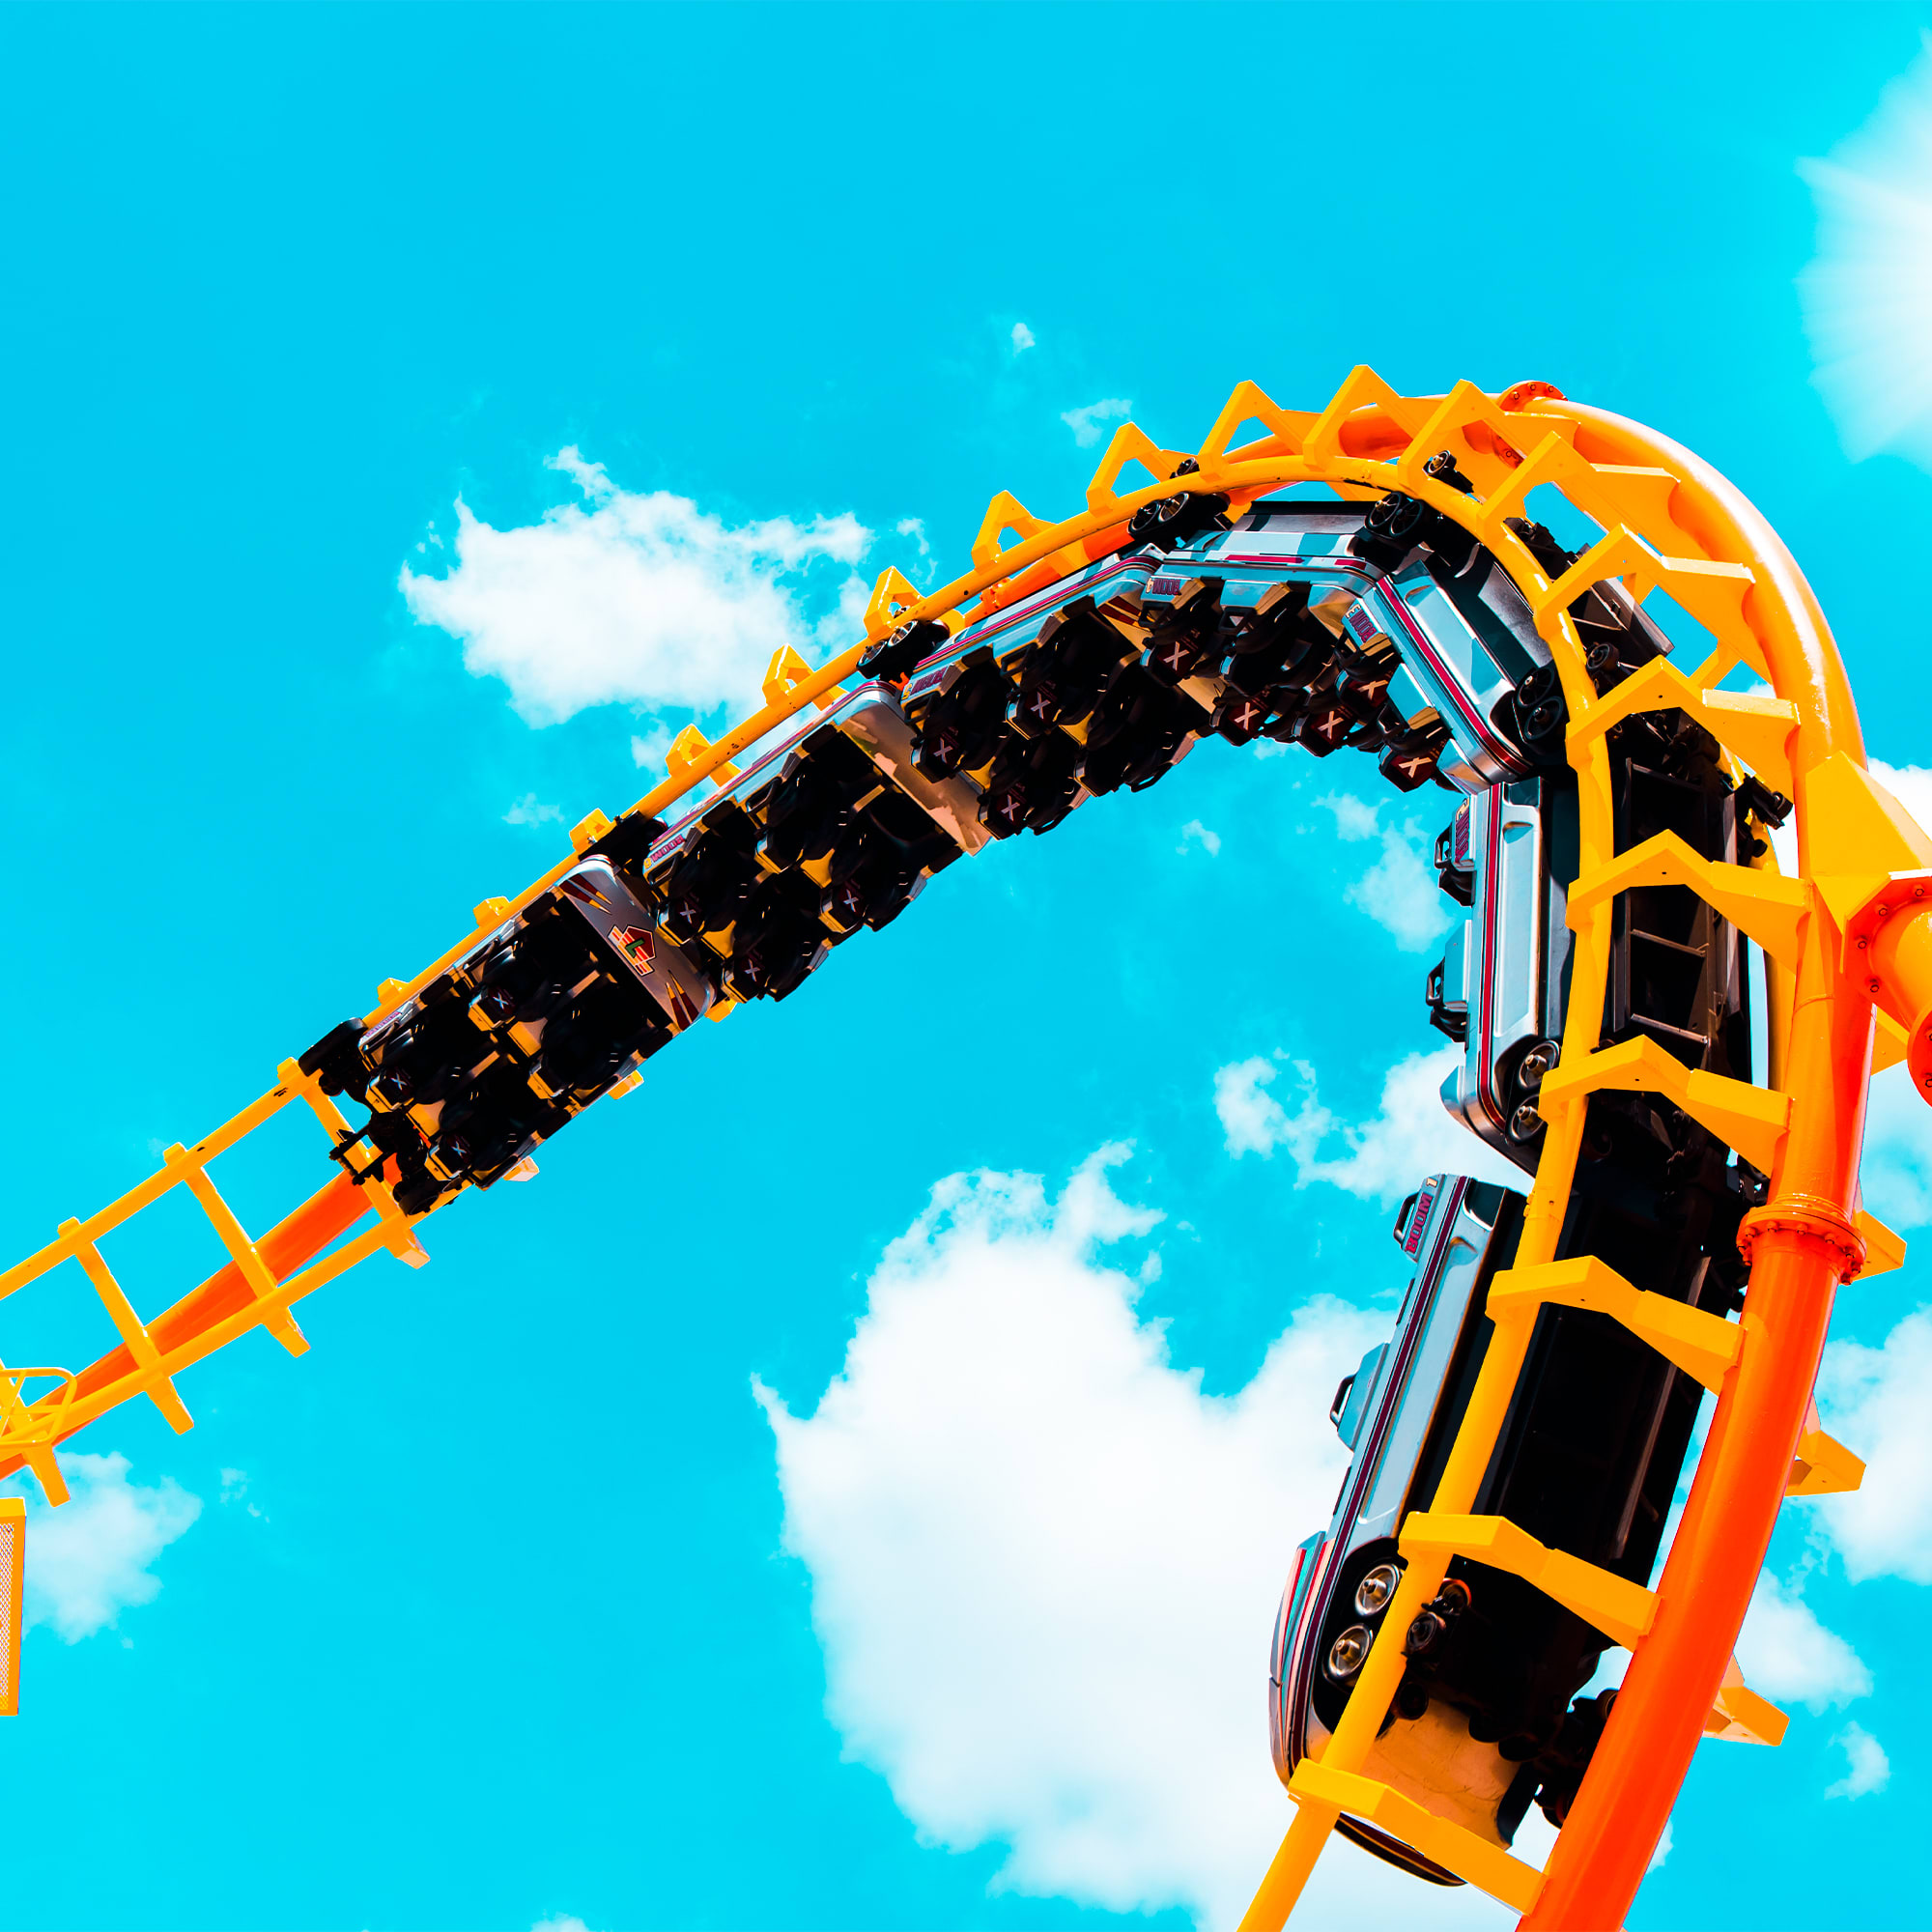 Looking for thrills and excitement? Explore Miami's top theme parks and amusement parks for a fun-filled day with family and friends. Experience heart-pumping rides, captivating attractions, and incredible shows - there's never a dull moment!